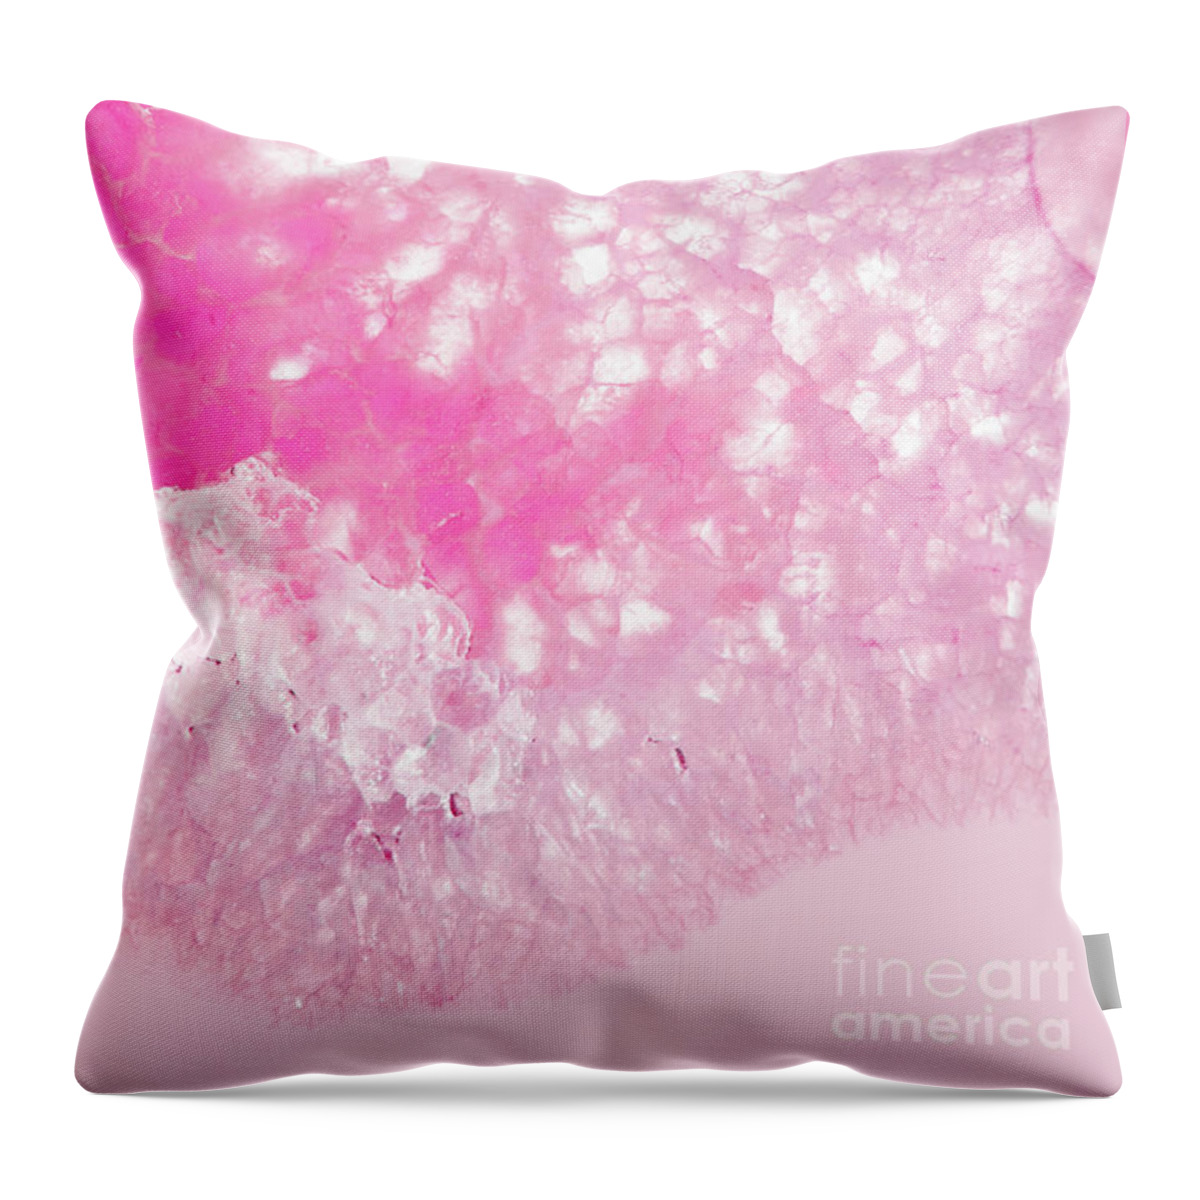 Delicate Throw Pillow featuring the photograph Delicate Pink Agate by Emanuela Carratoni